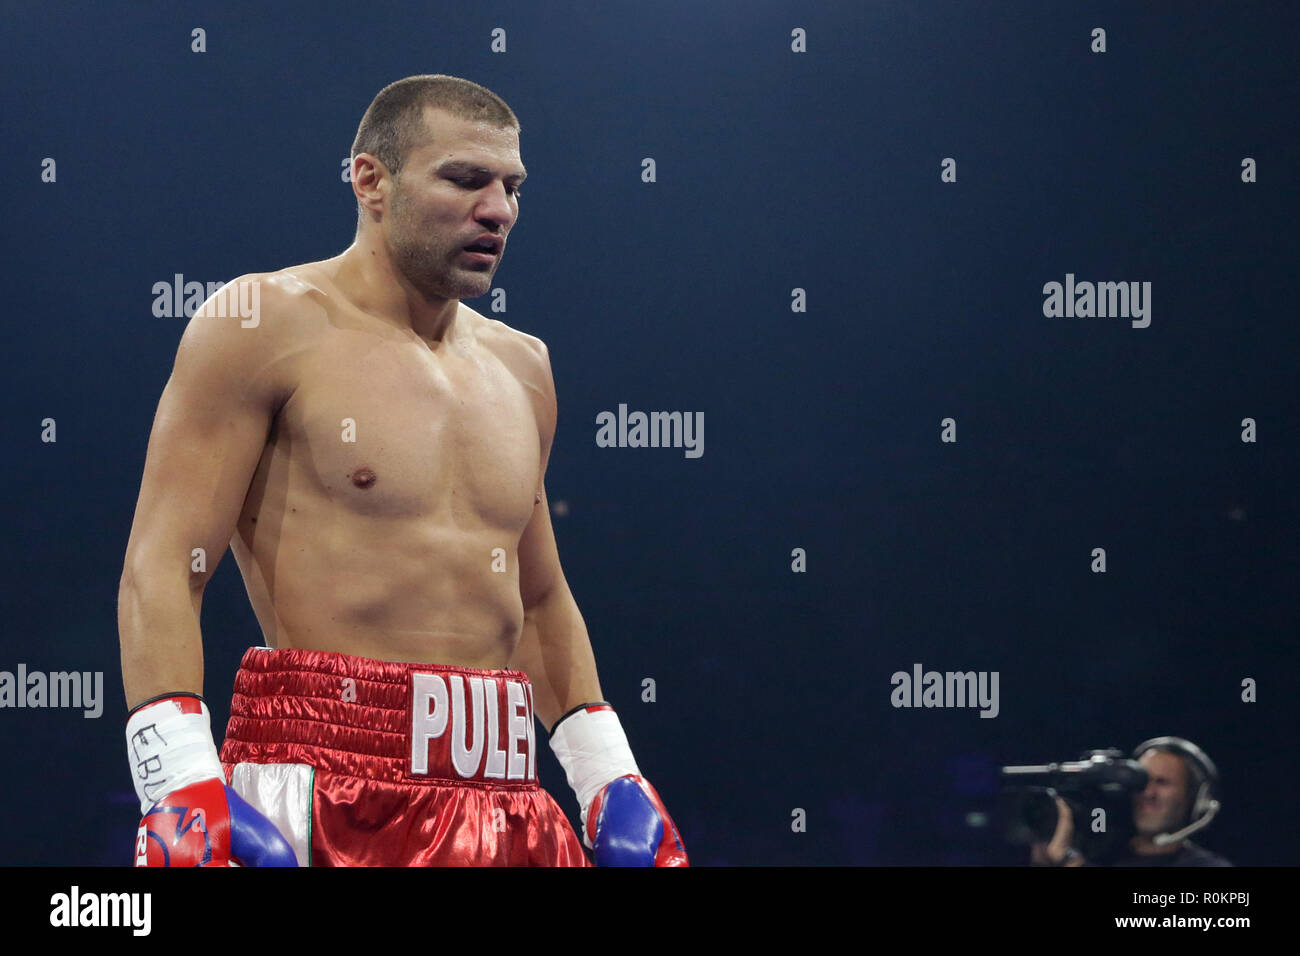 Sofia, Bulgaria - 27 October 2018: Boxing match between Tervel Pulev  (pictured) and Leonardo Damian Bruzzese for European Union cruiserweight  champion Stock Photo - Alamy